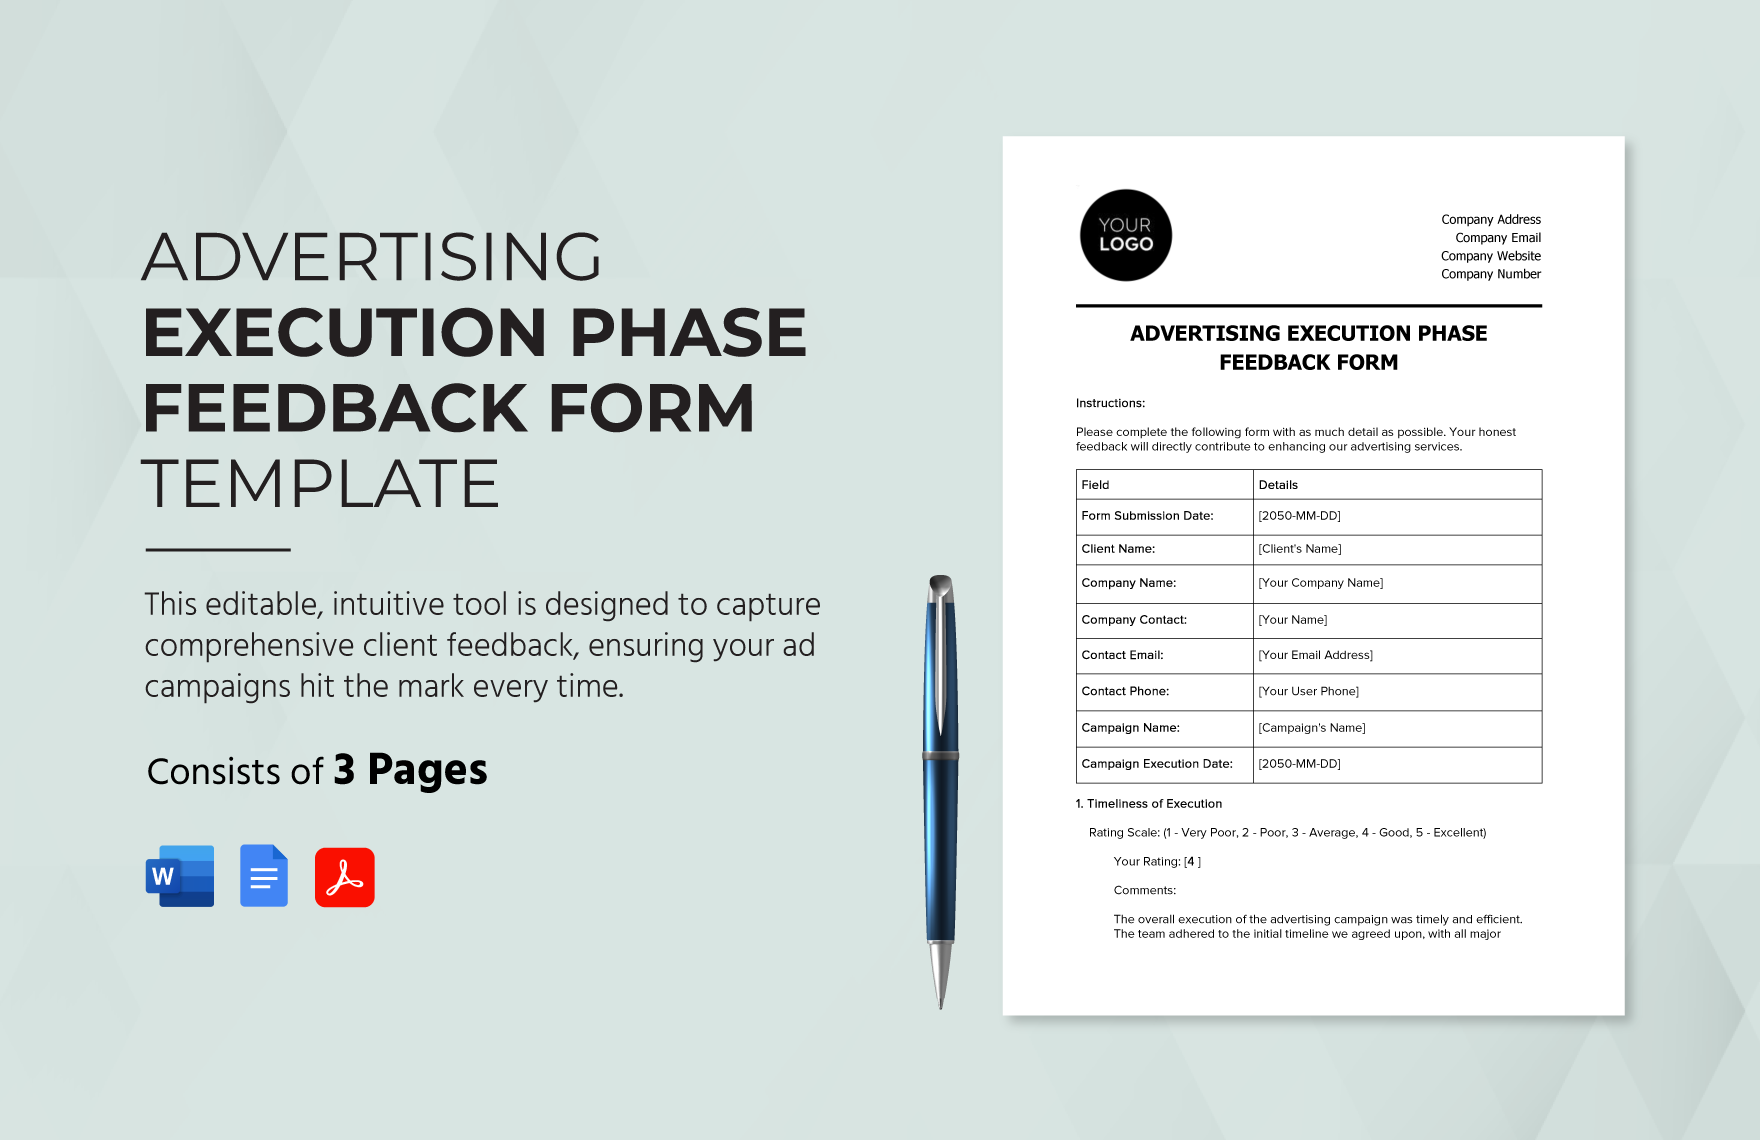 Advertising Execution Phase Feedback Form Template in Word, Google Docs, PDF